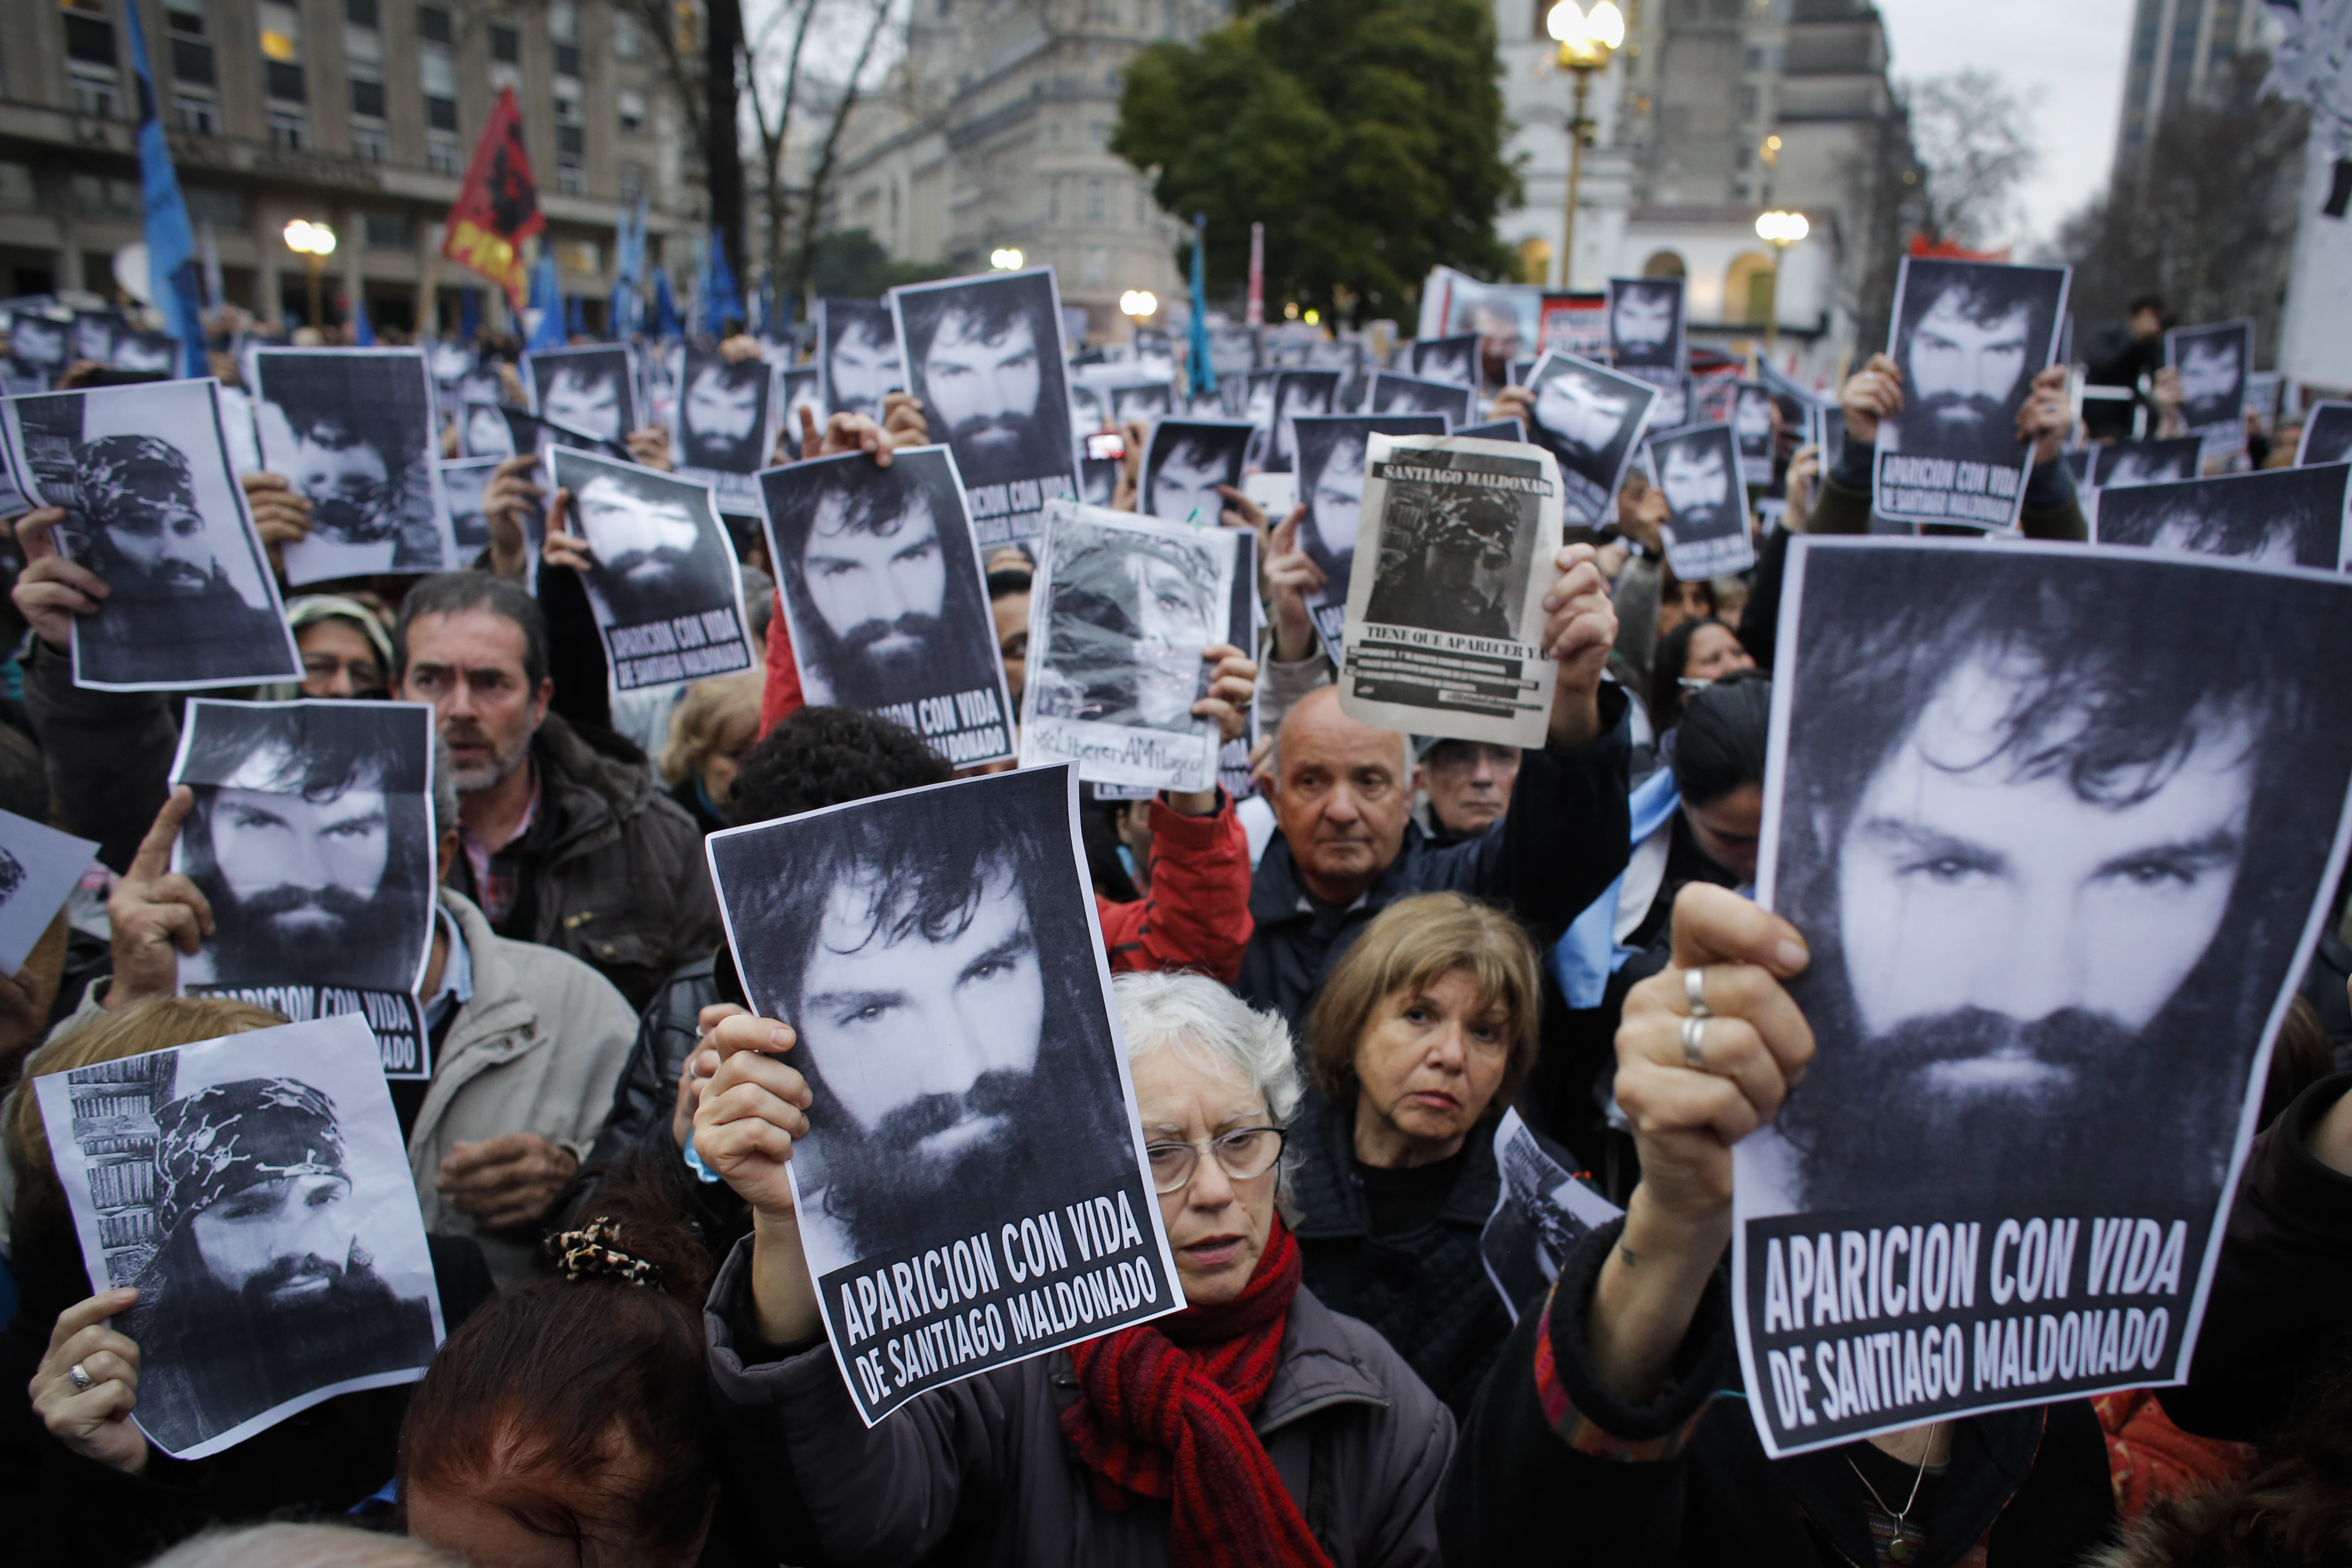 FILE - In this Aug. 11, 2017 file photo, people hold up posters with an image of missing activist Santiago Maldonado, 28, during a demonstration at Plaza de Mayo, in Buenos Aires, Argentina. The Inter-American Commission on Human Rights is urging Argentina to find the missing activist last seen when police evicted a group of Mapuche Indians from lands owned by Italian clothing company Benetton. The commission's president said Thursday, Aug. 24, that Argentina should investigate the Aug. 1 disappearance of Maldonado and make its findings public. (AP Photo/Victor R. Caivano, File)